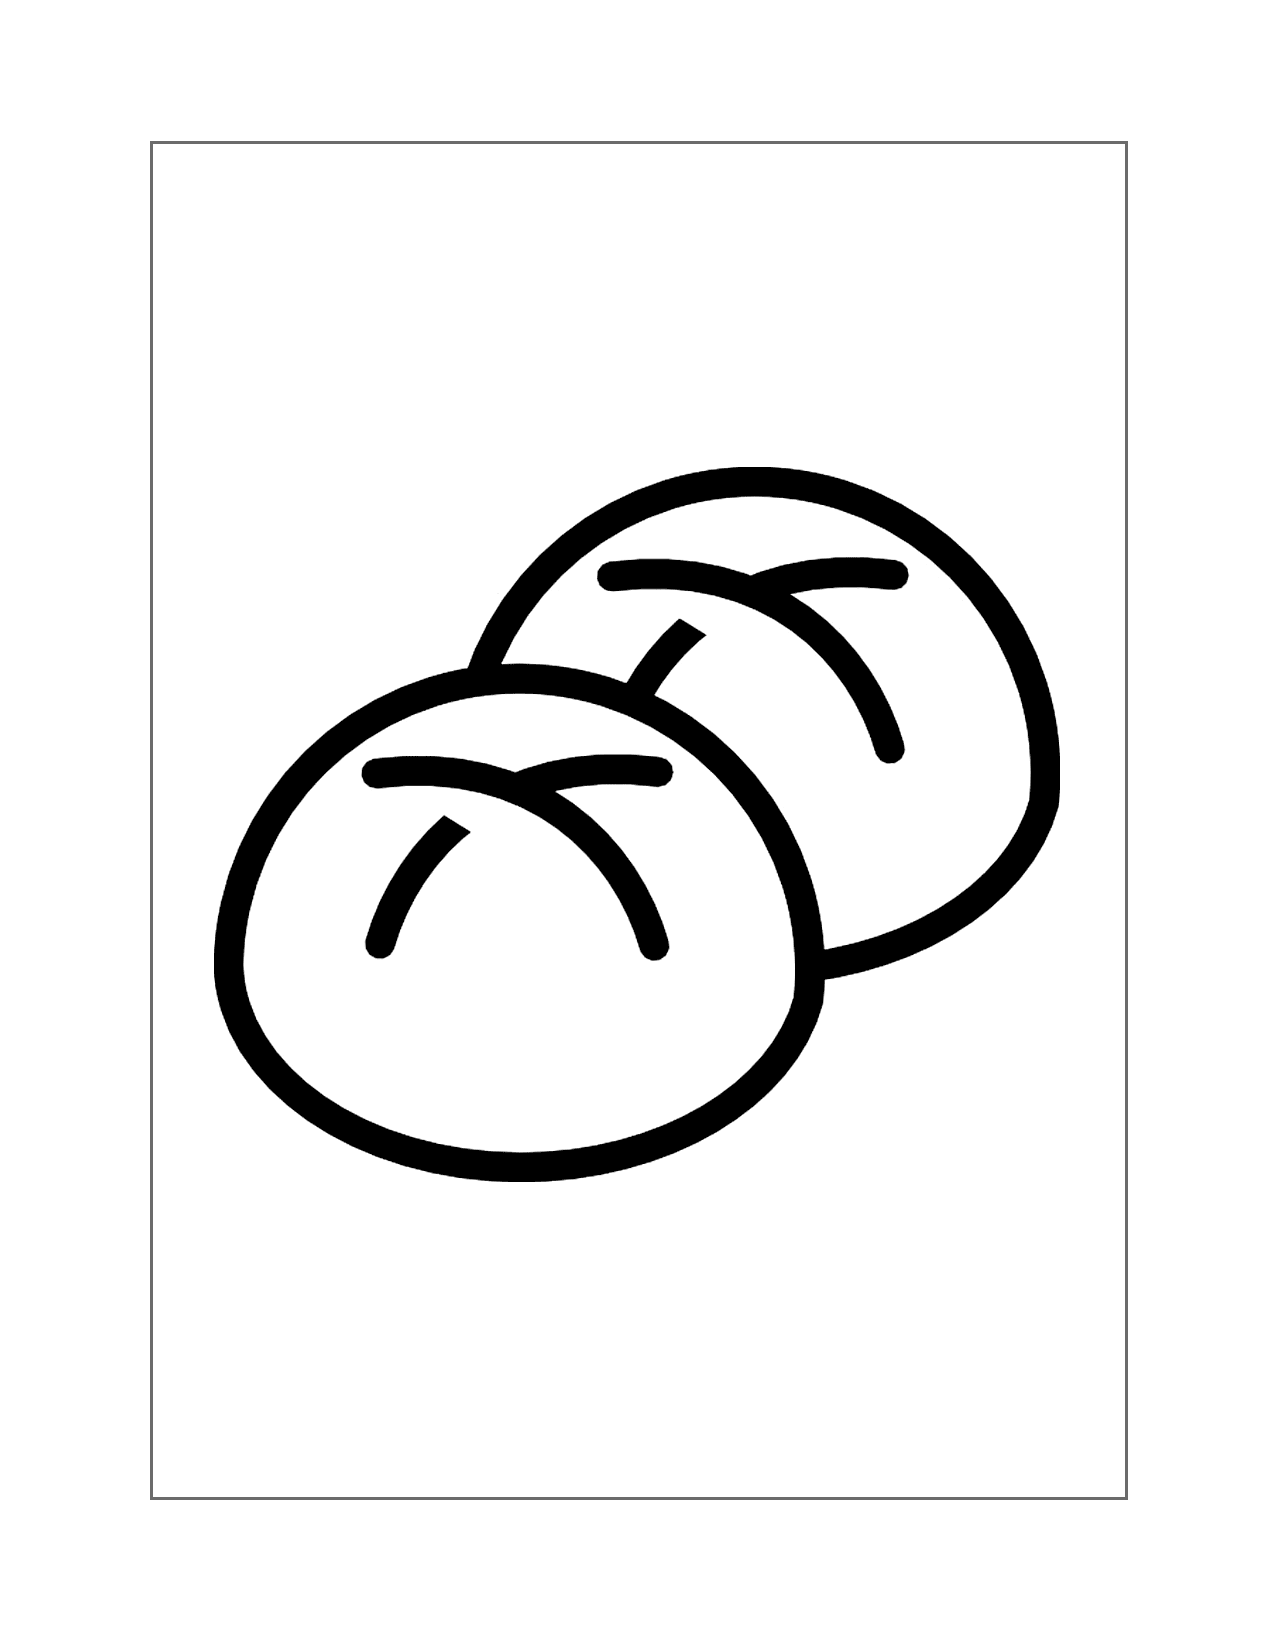 Bread Rolls Coloring Page